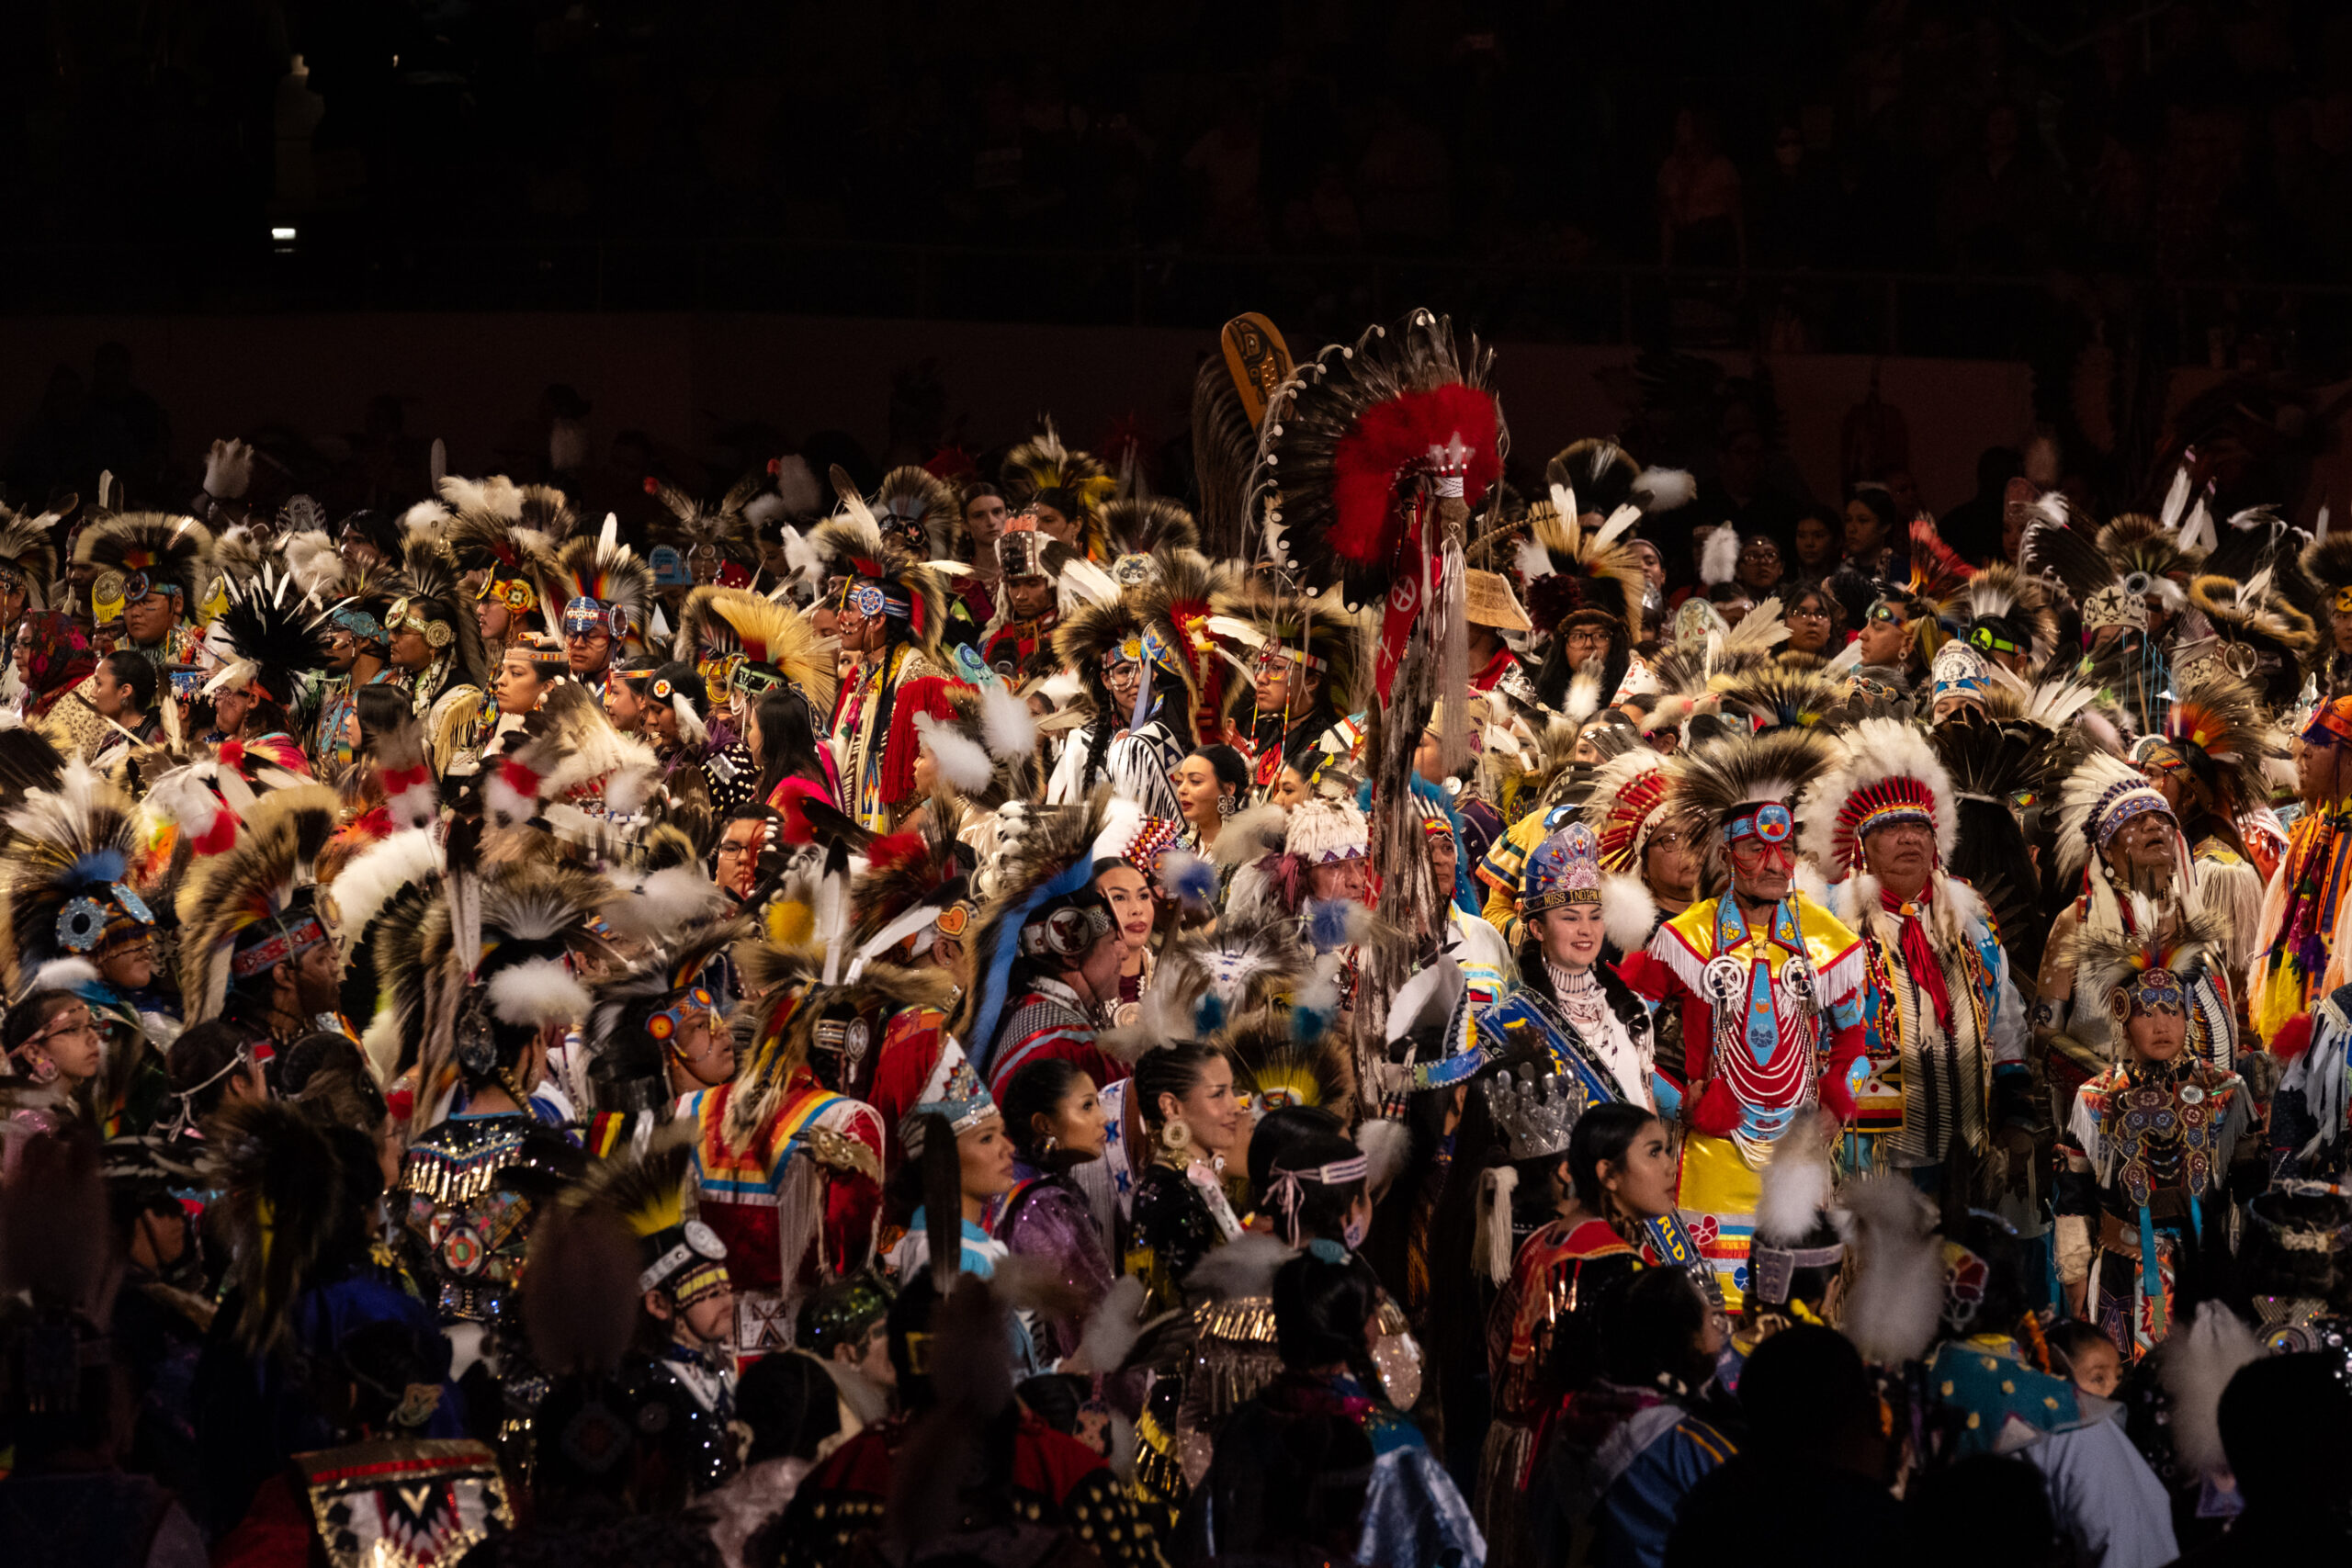 Gathering of Nations draws thousands to Albuquerque, N.M.